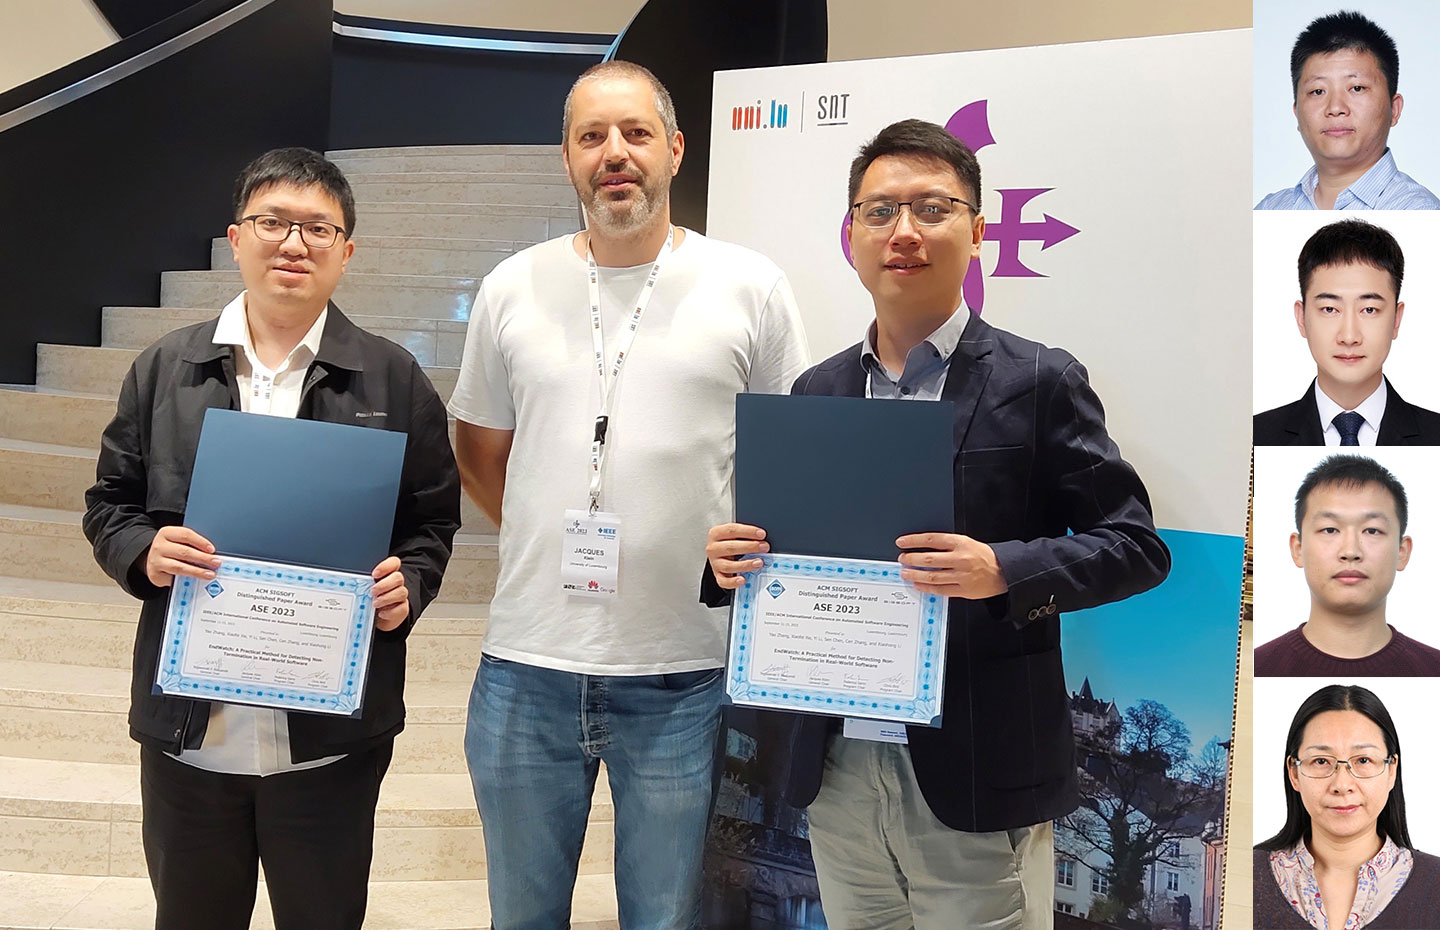 Main photo of two researchers holding cert standing between a presenter. Inset photo on the right are 4 awardees researchers.